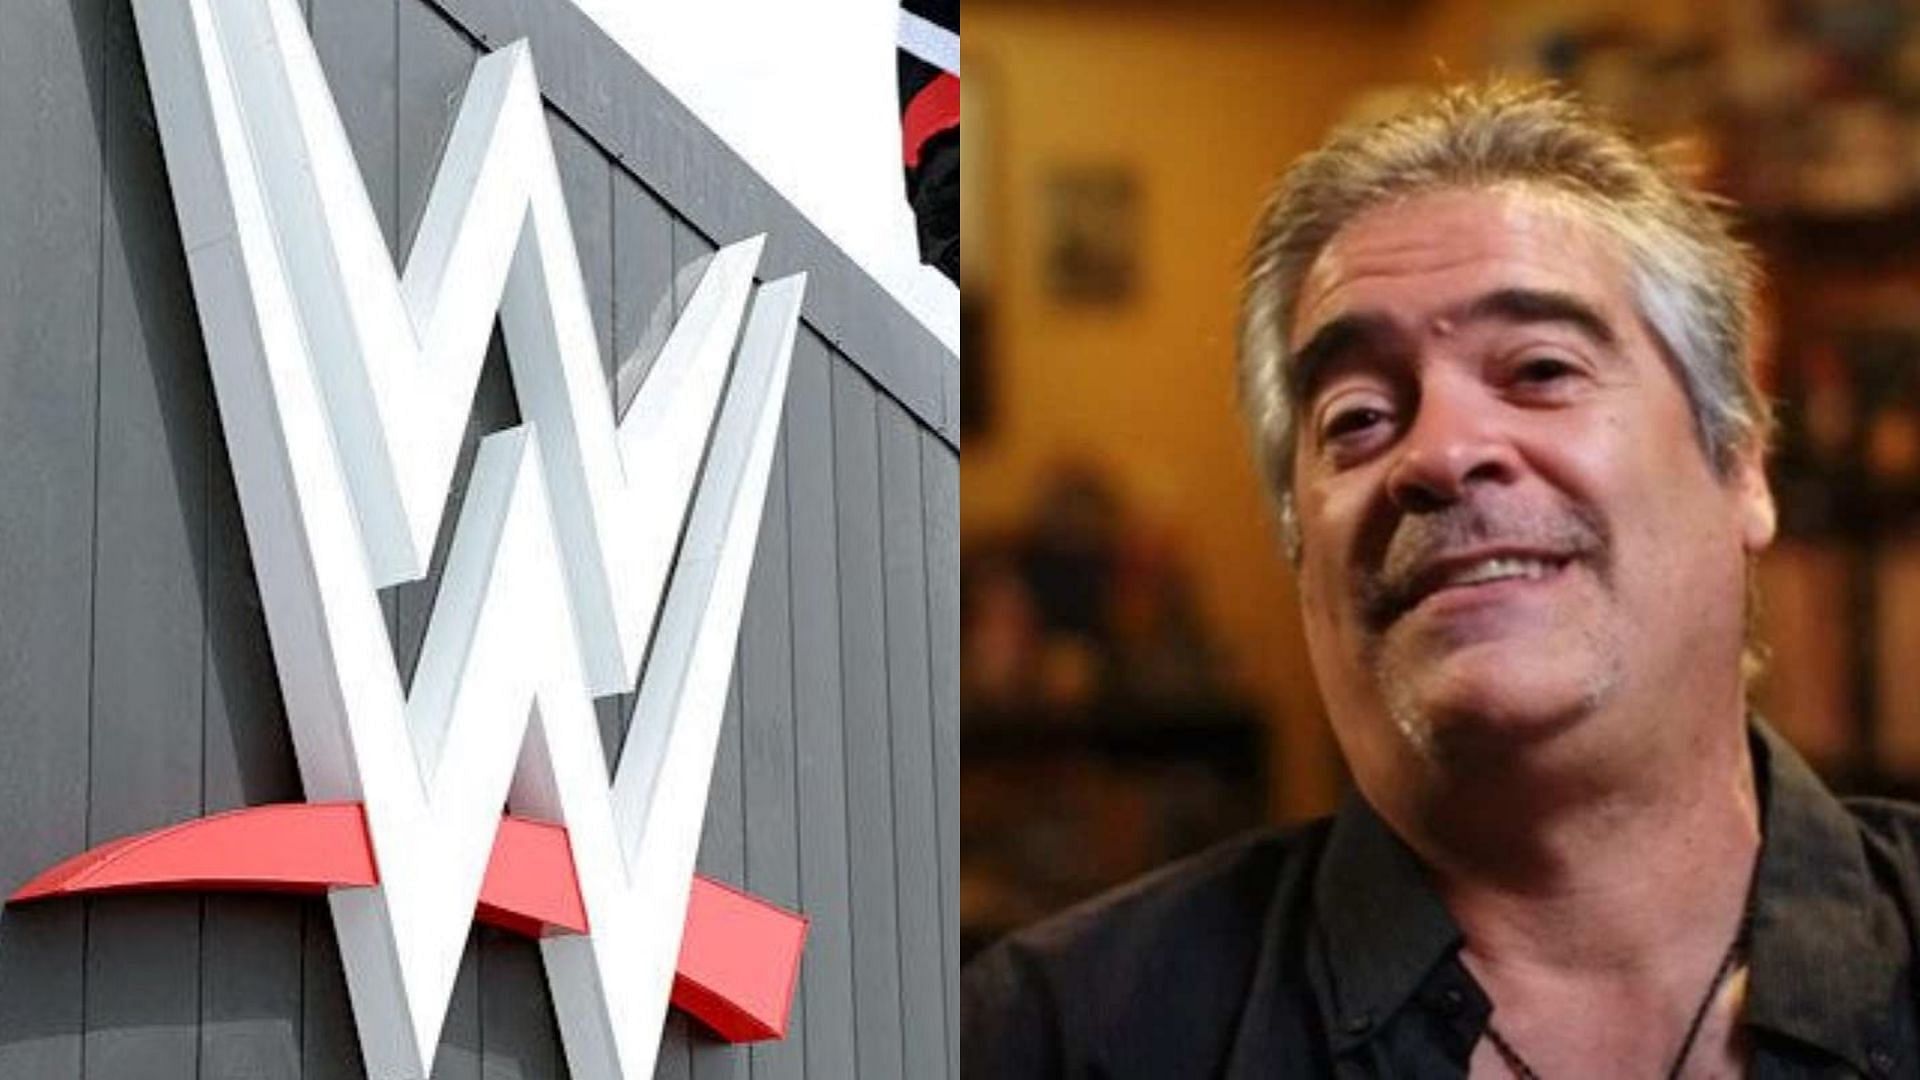 Vince Russo had some interesting opinions to share this week